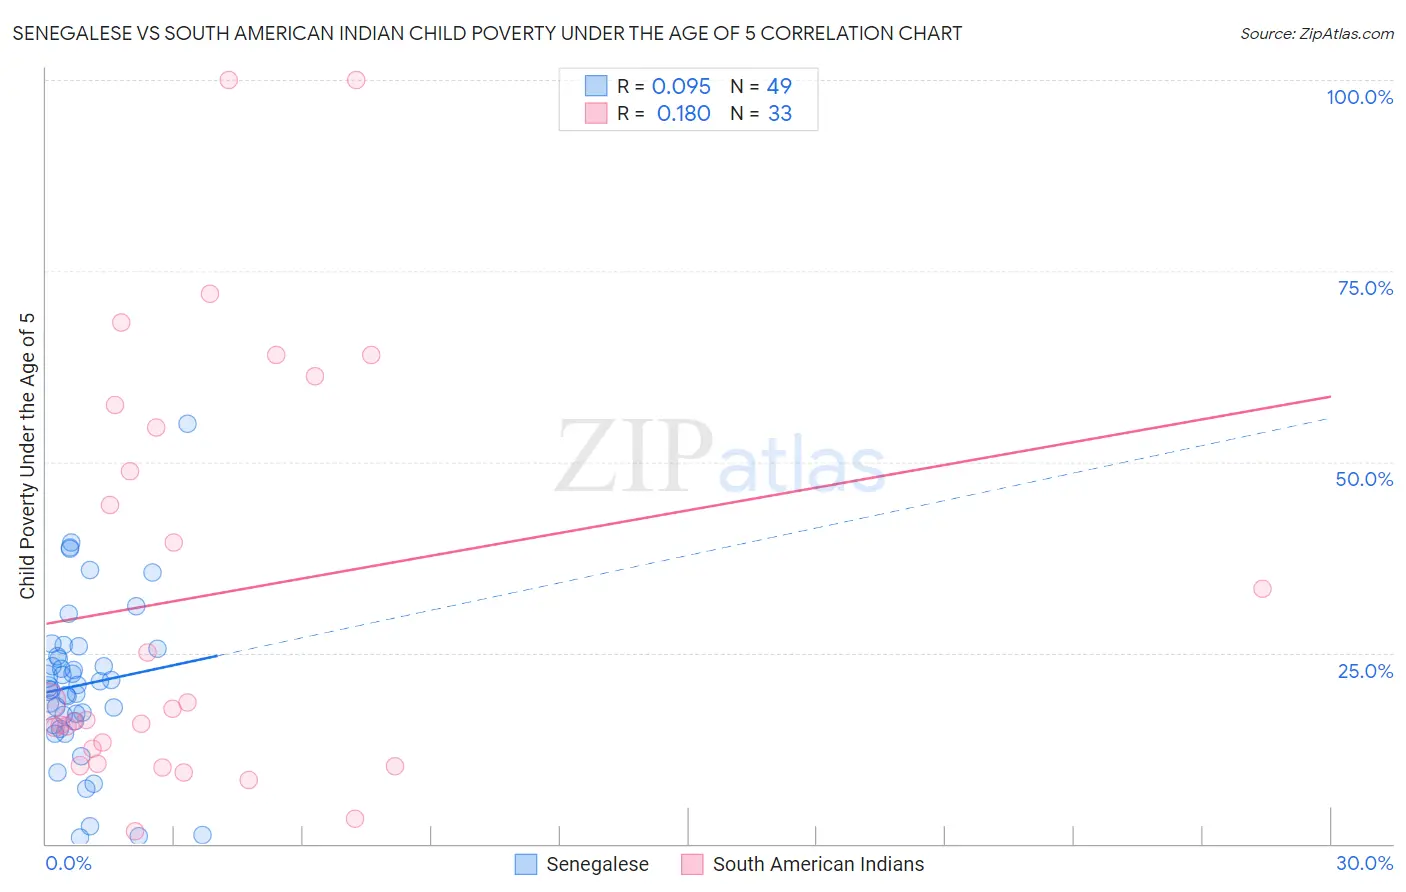 Senegalese vs South American Indian Child Poverty Under the Age of 5